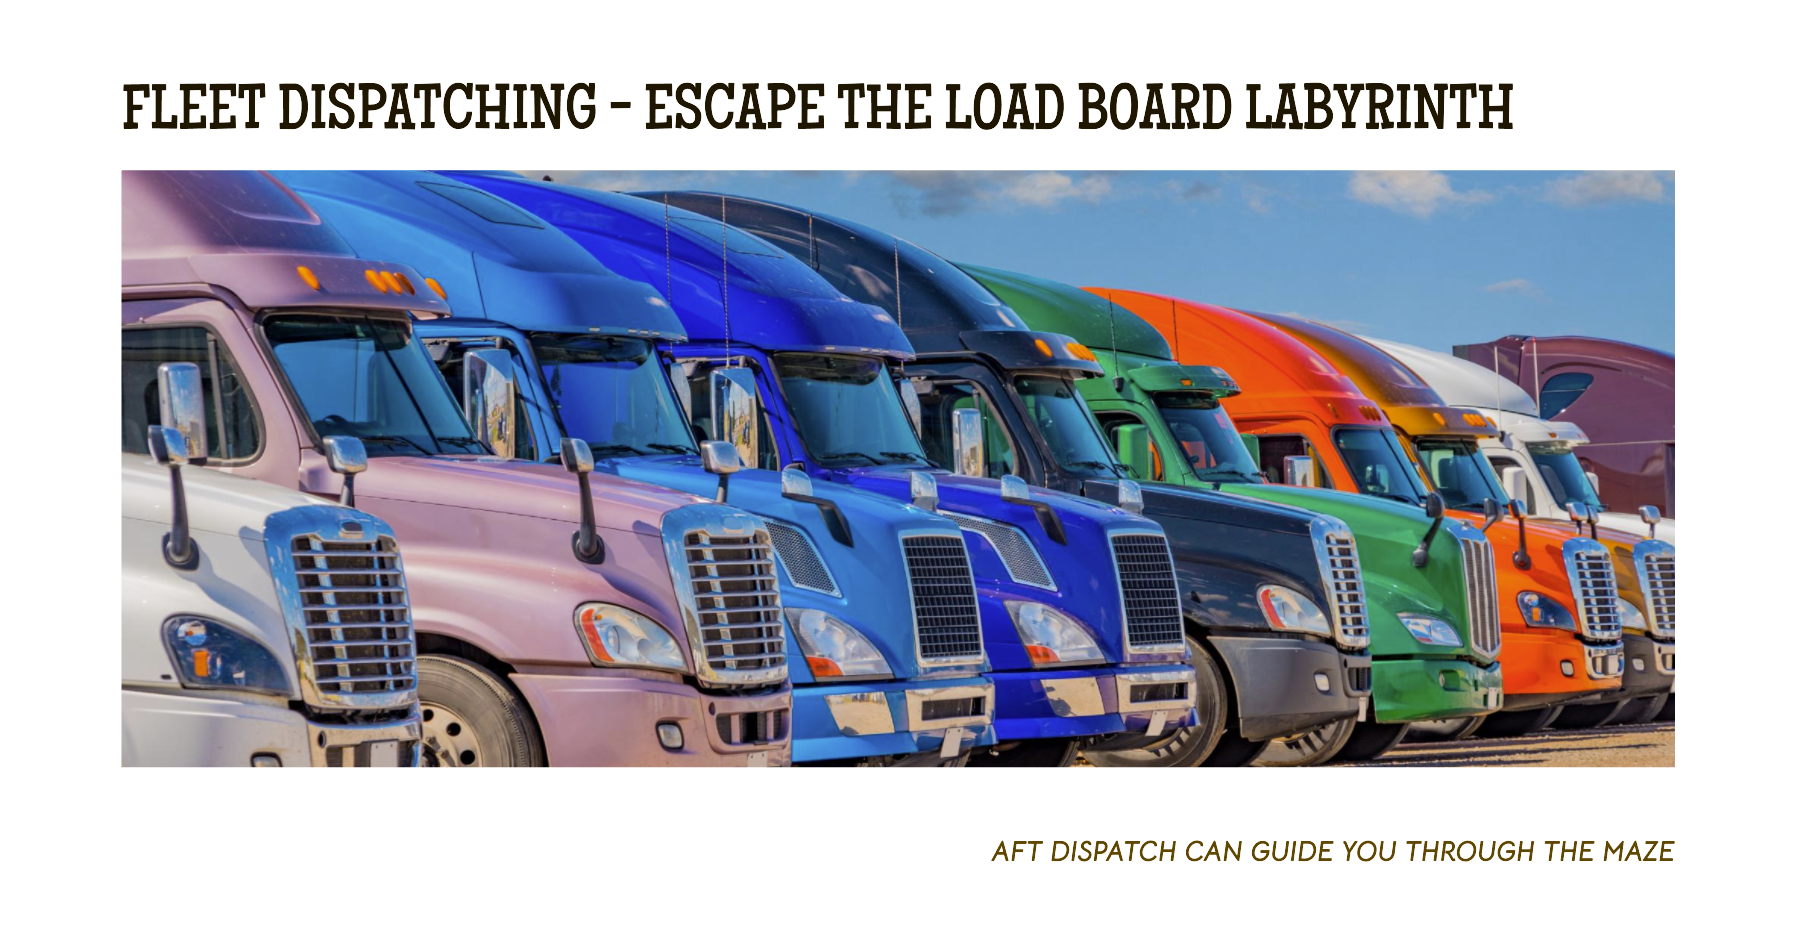 Fleet Dispatching - Escape the Load Board Labyrinth